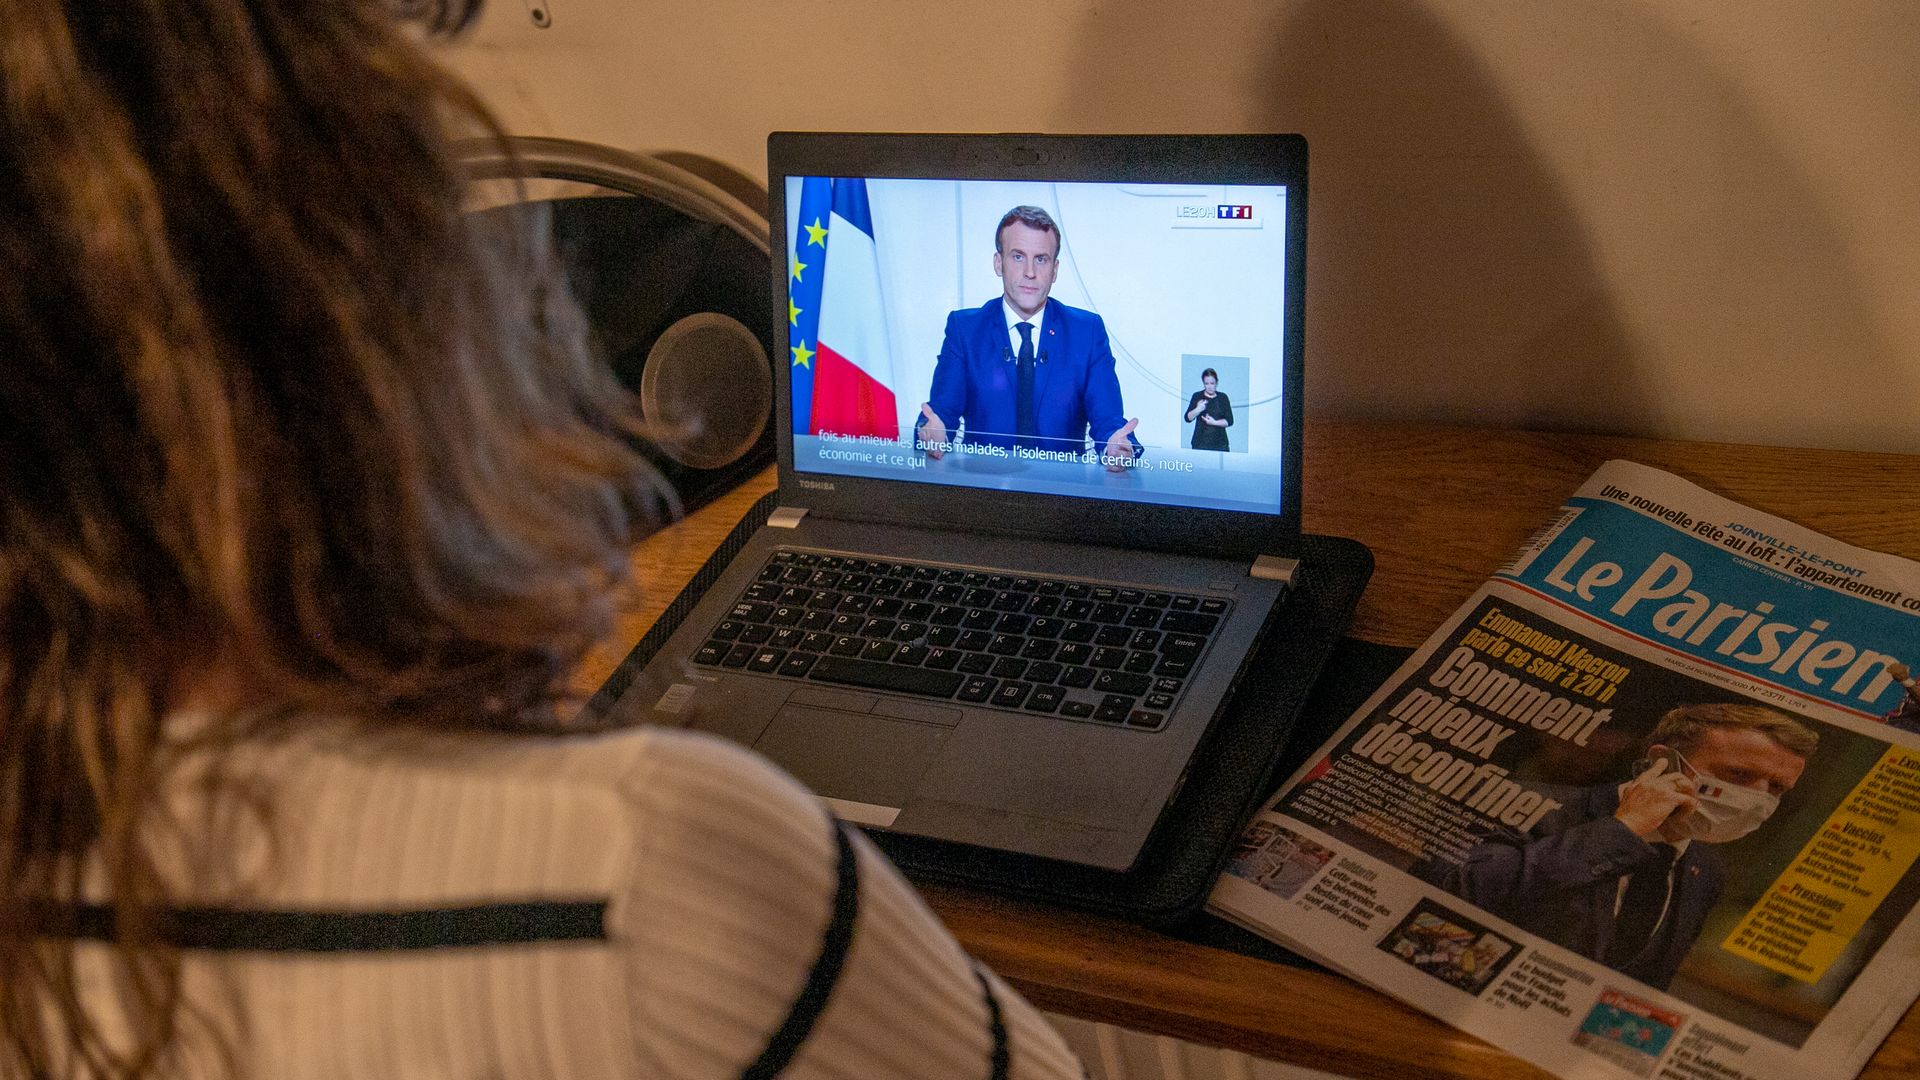 Photo of a person watching Emmanuel Macron's televised address on a laptop screen